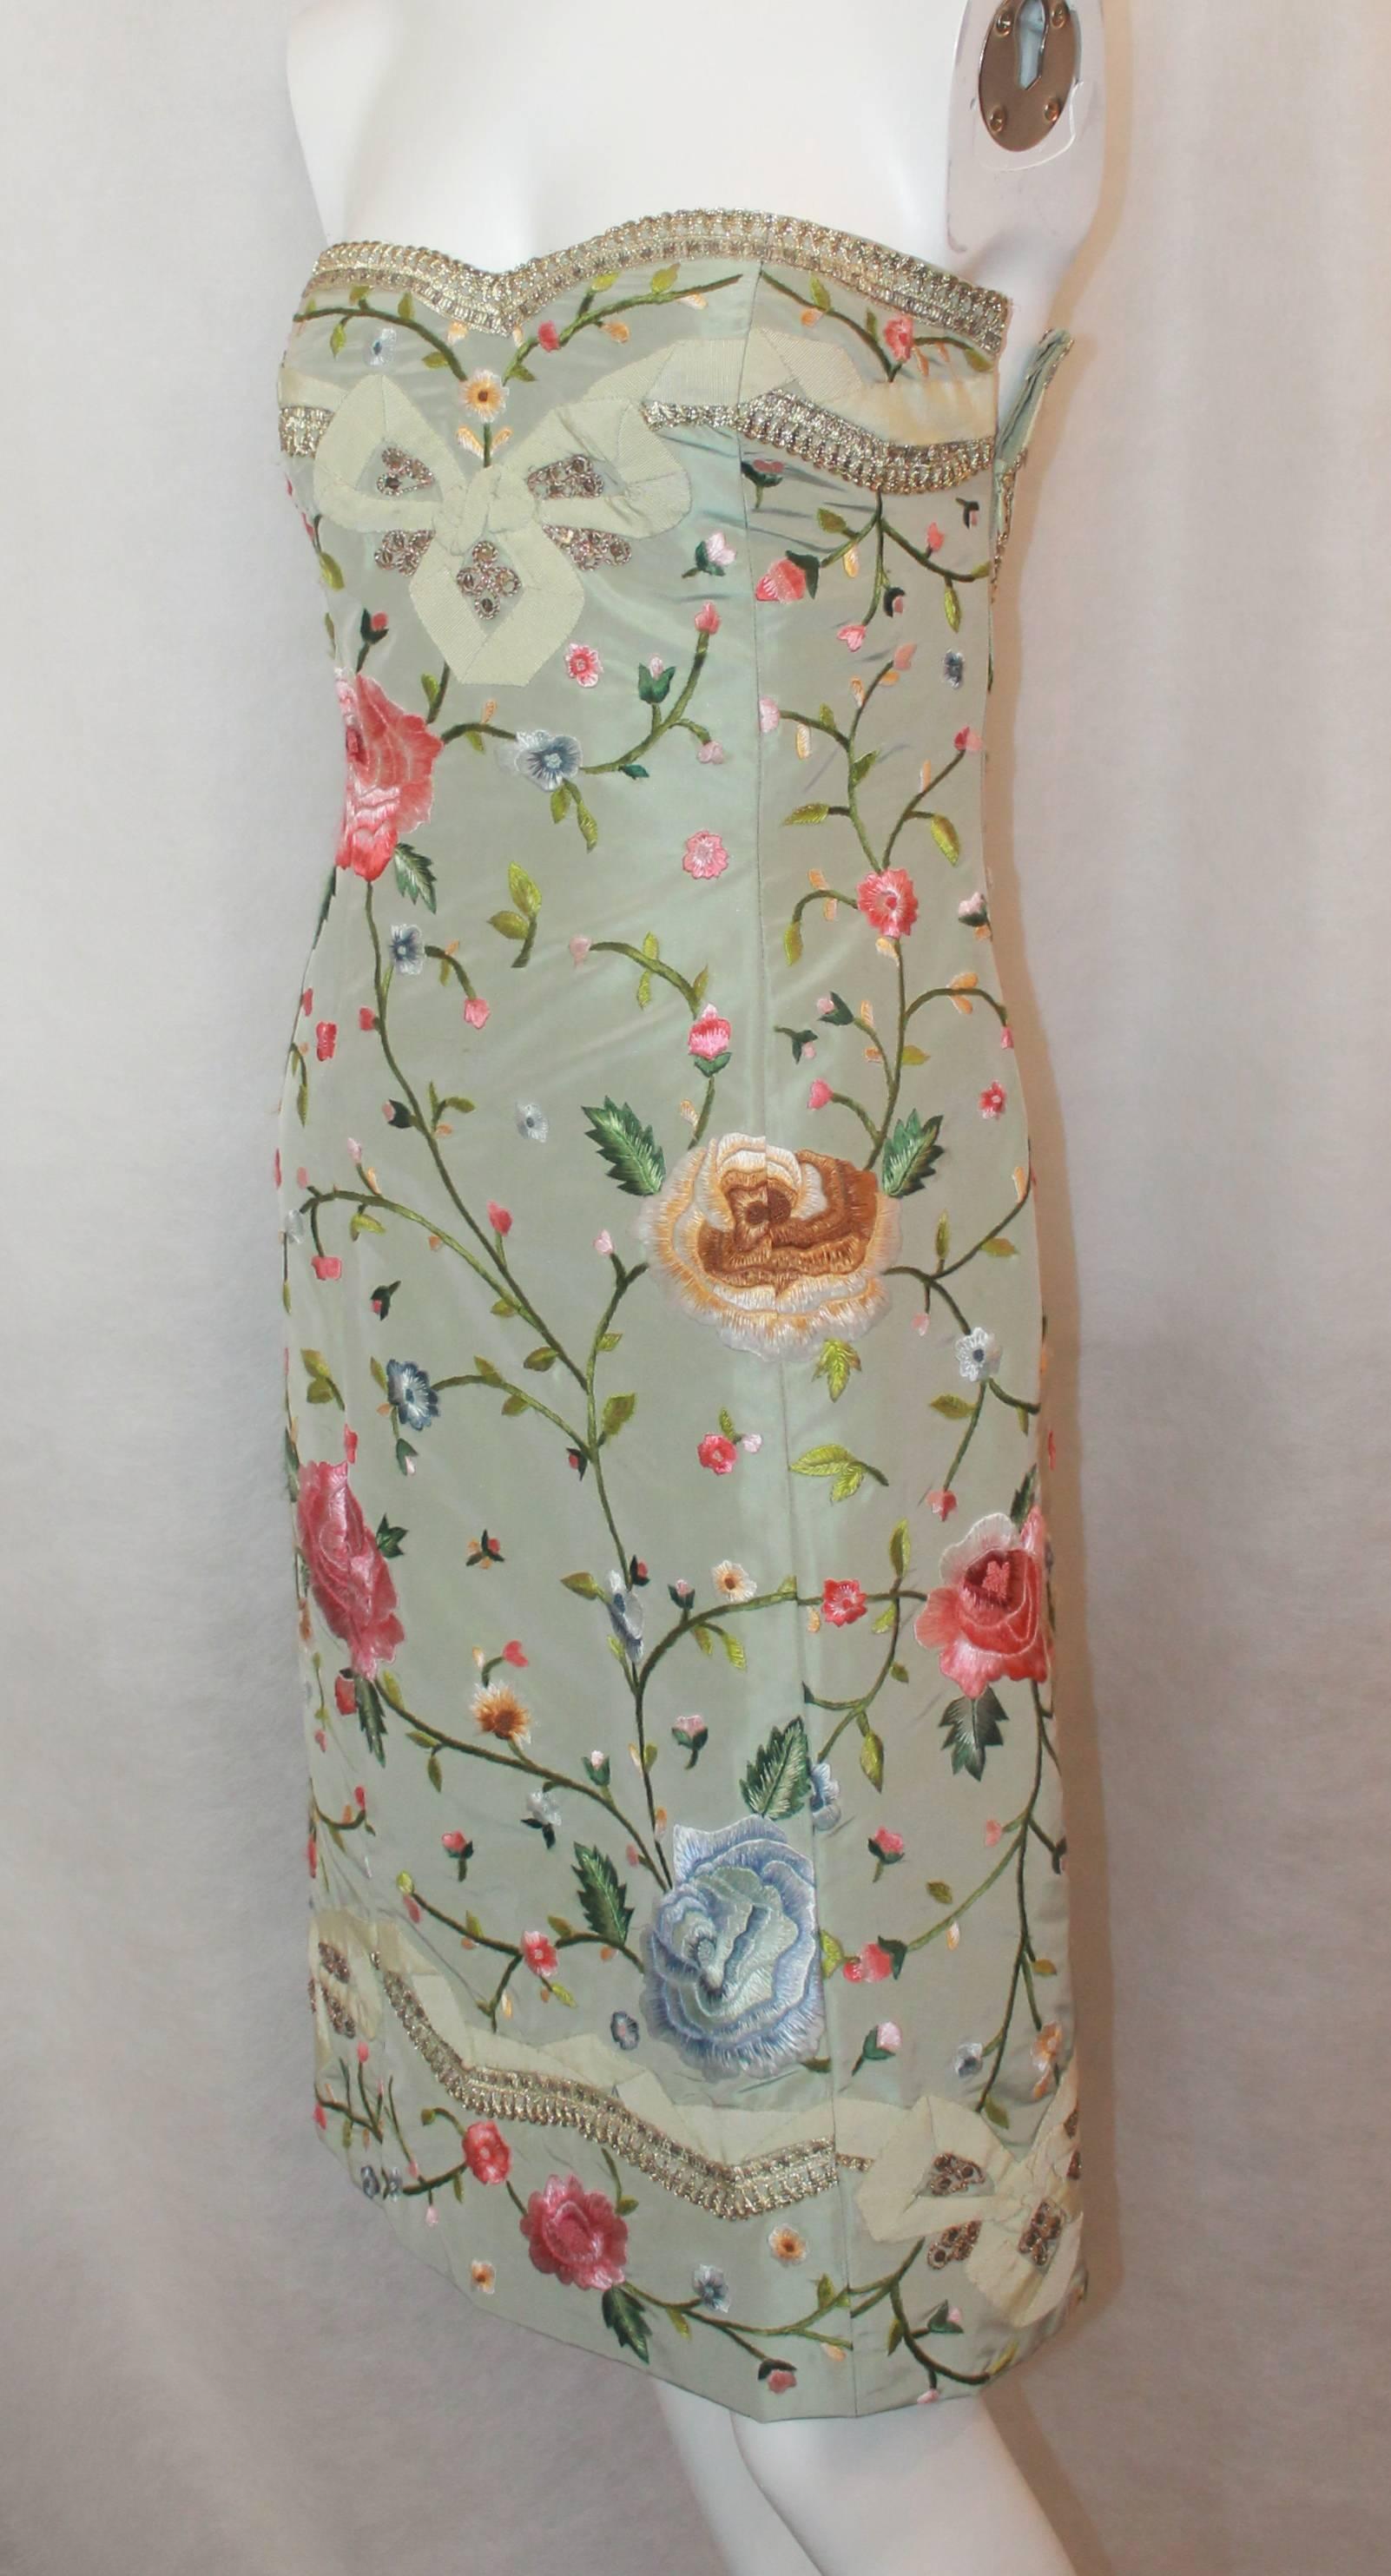 Oscar de la Renta Pastel Green Silk Taffeta Floral Strapless Dress - 4. This dress is in very good condition with the only issue being that the floral embroidery is pilling and there is one very small spot on the back (shown in the images). The